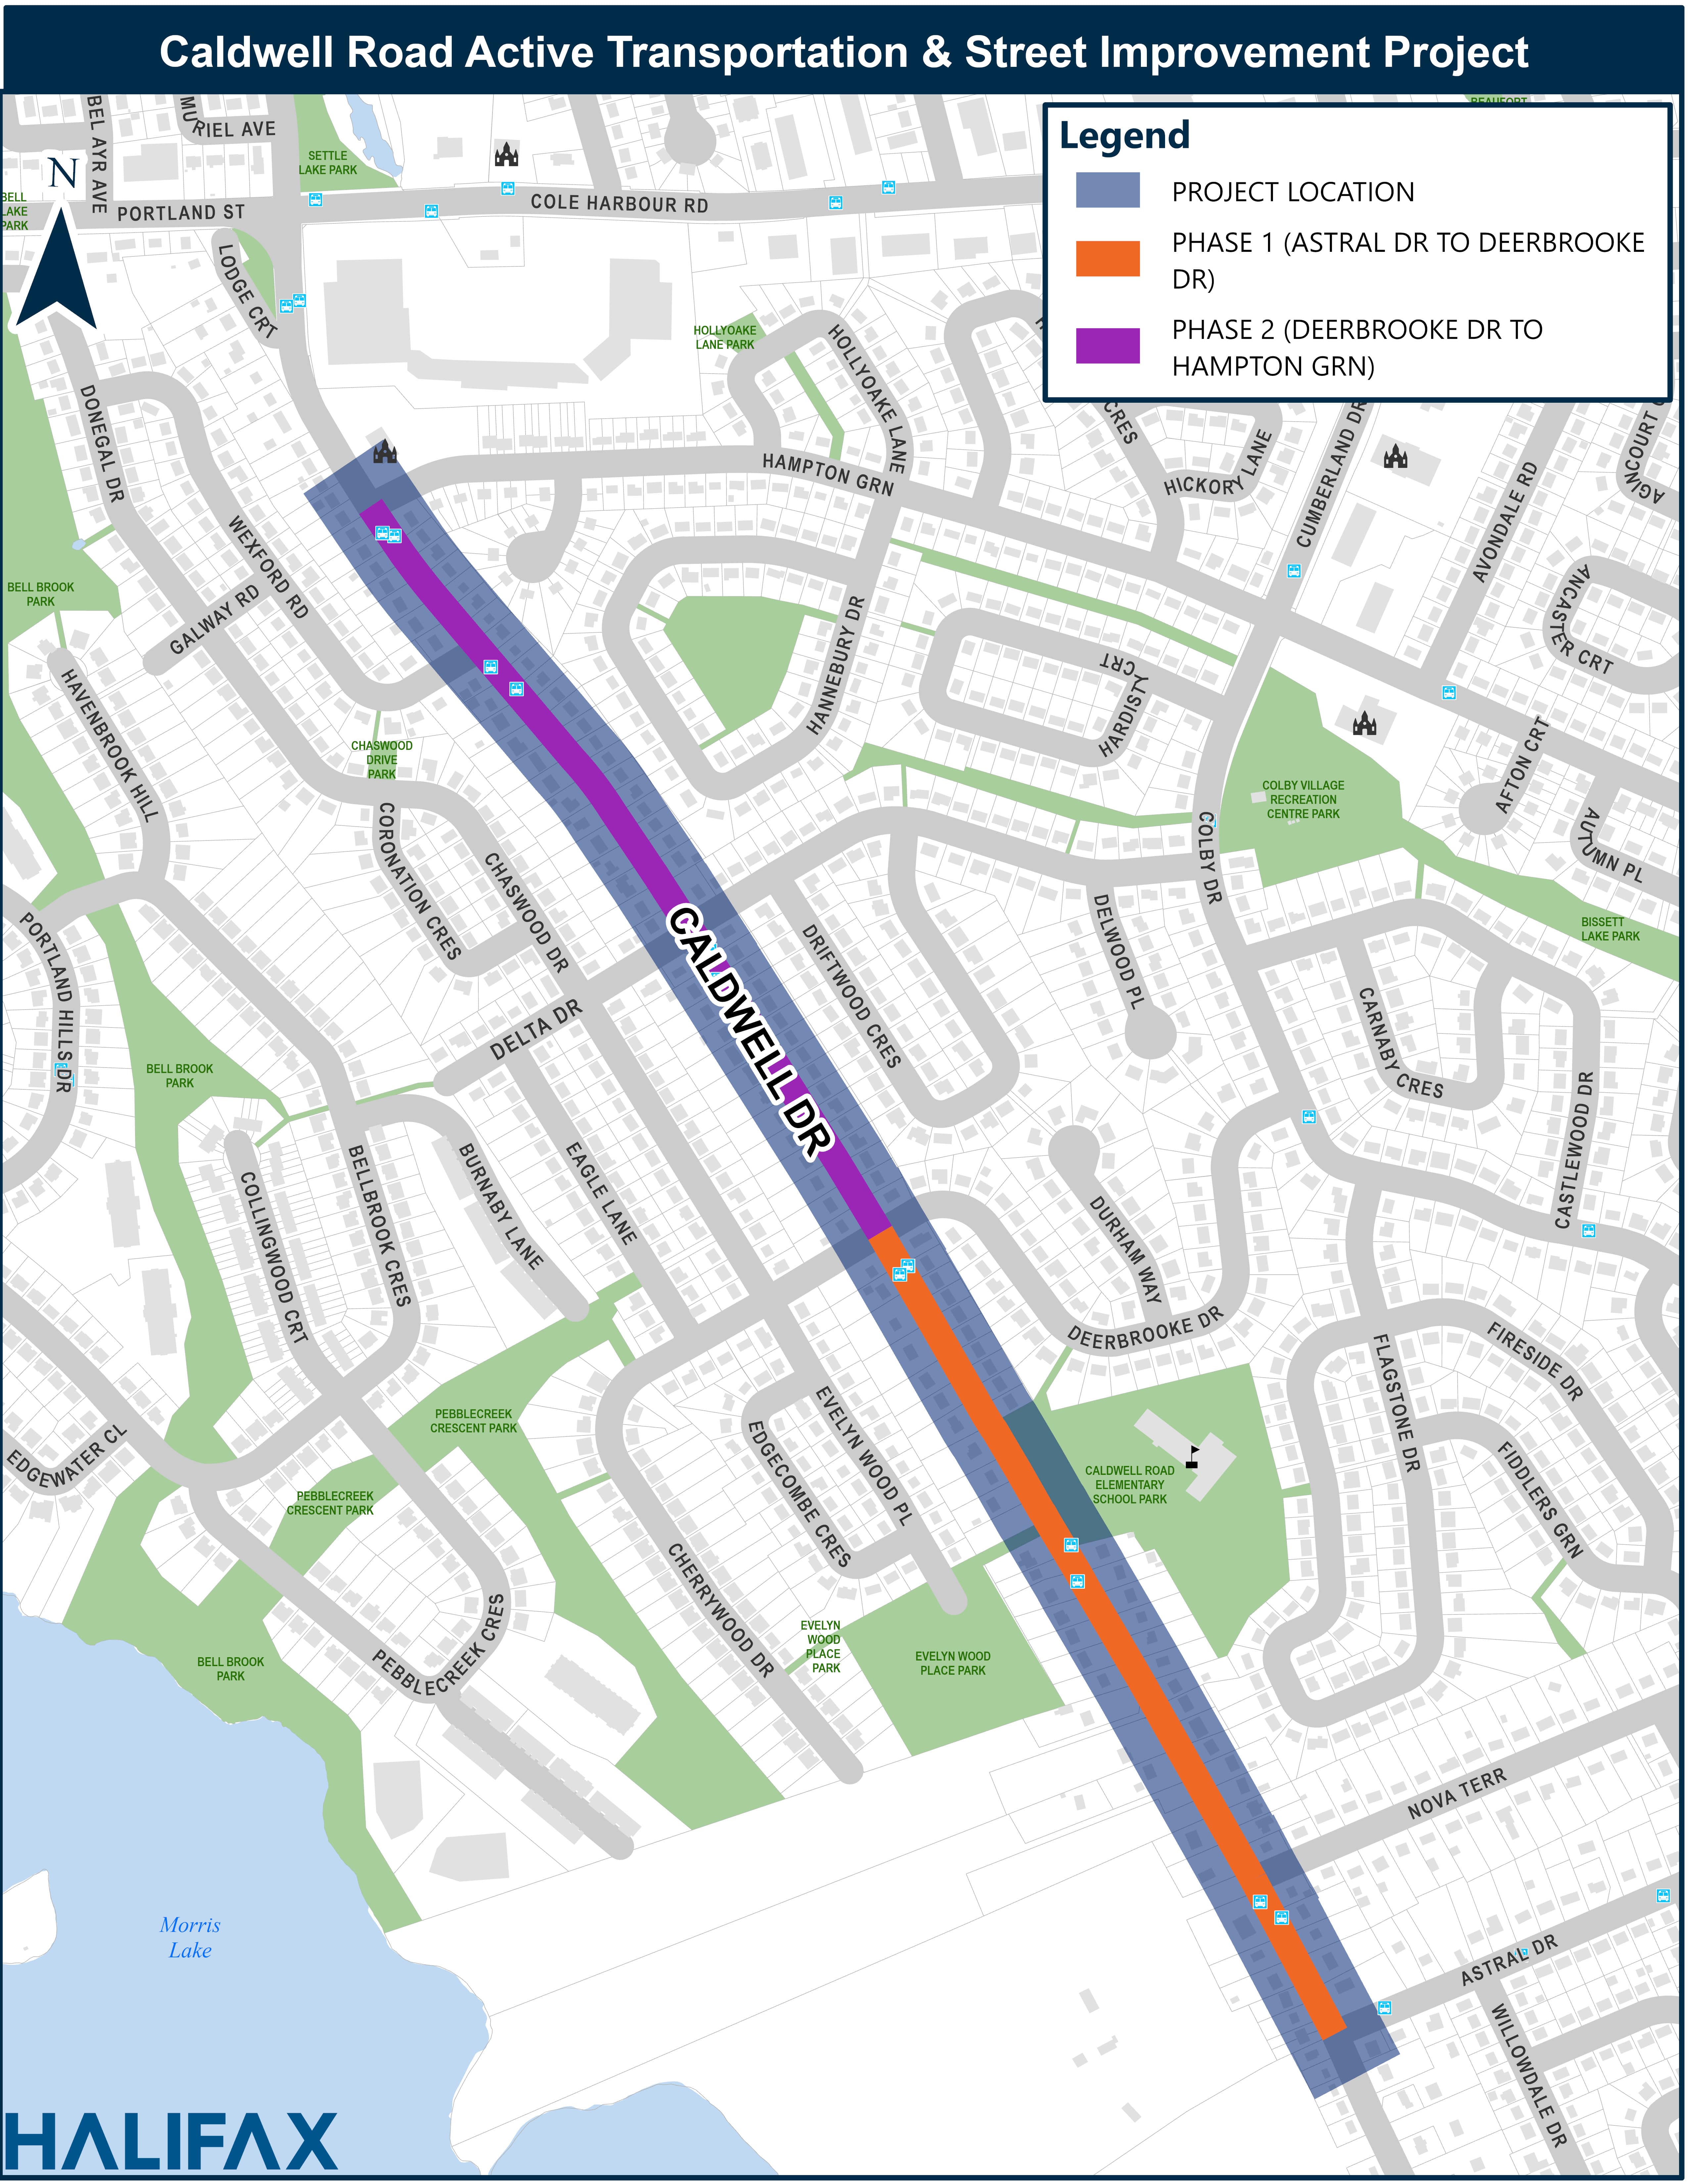 A map of Caldwell Road between Astral Drive and Hampton Green, showing Phase 1 of construction between Astral Drive and Deerbrooke Drive, and Phase 2 between Deerbrooke Drive and Hampton Green 